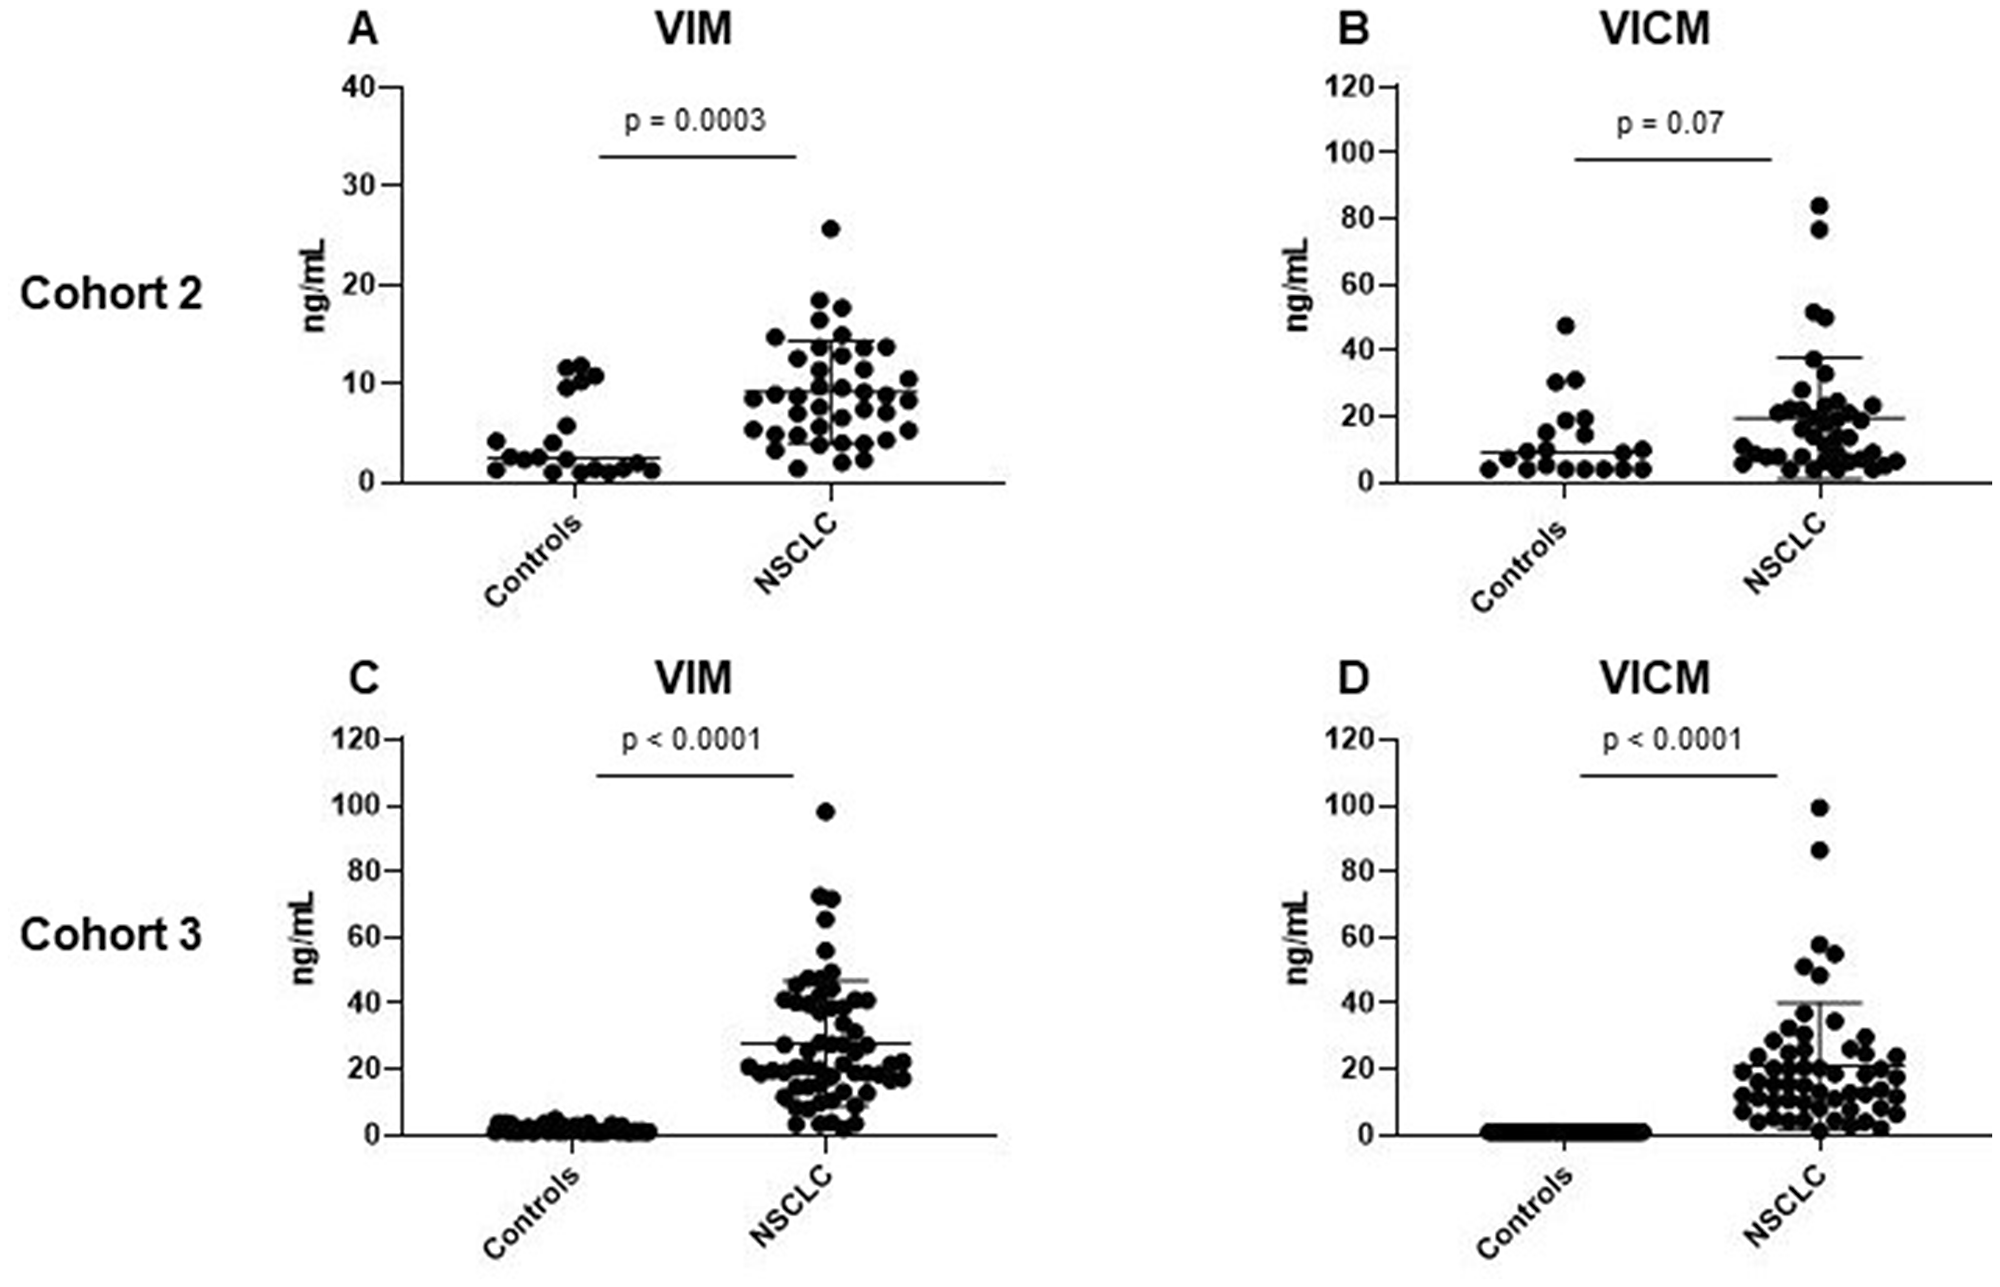 Clinical evaluation of MMP-degraded vimentin (VIM) and MMP-degraded and citrullinated vimentin (VICM) in patients with non-small cell lung cancer (NSCLC).